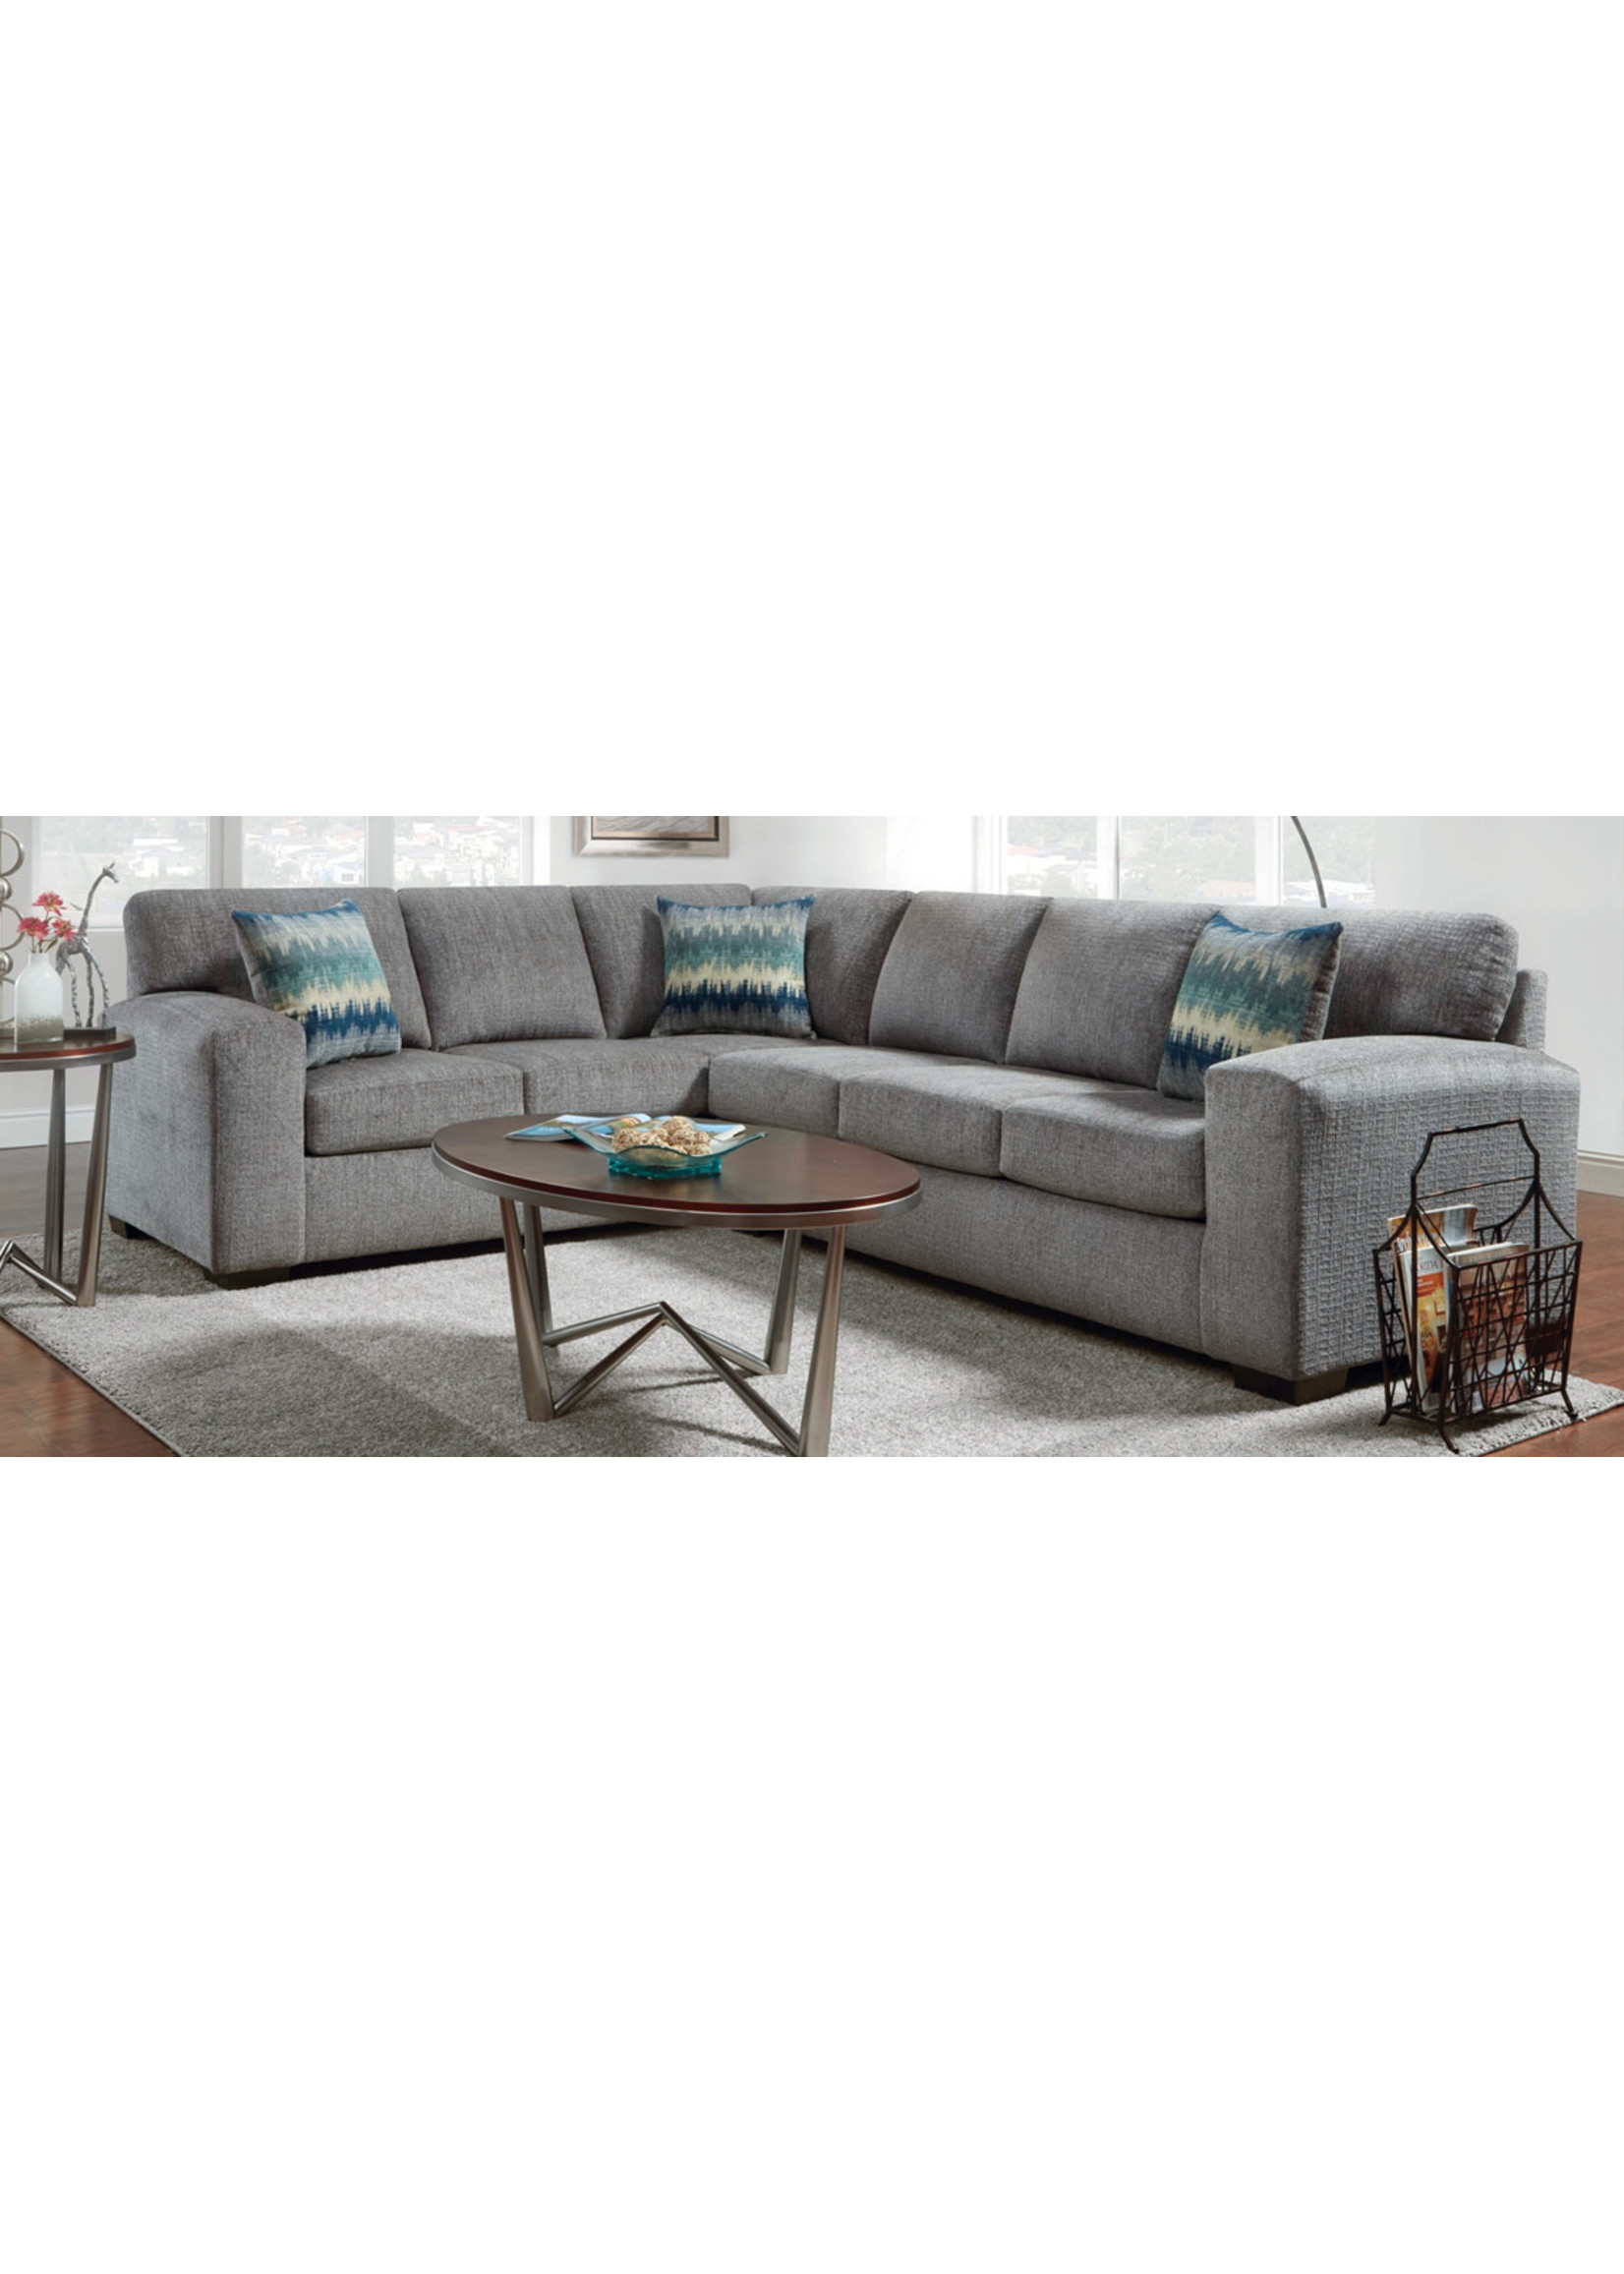 AFFORDABLE 5950 SILVERTON PEWTER SECTIONAL